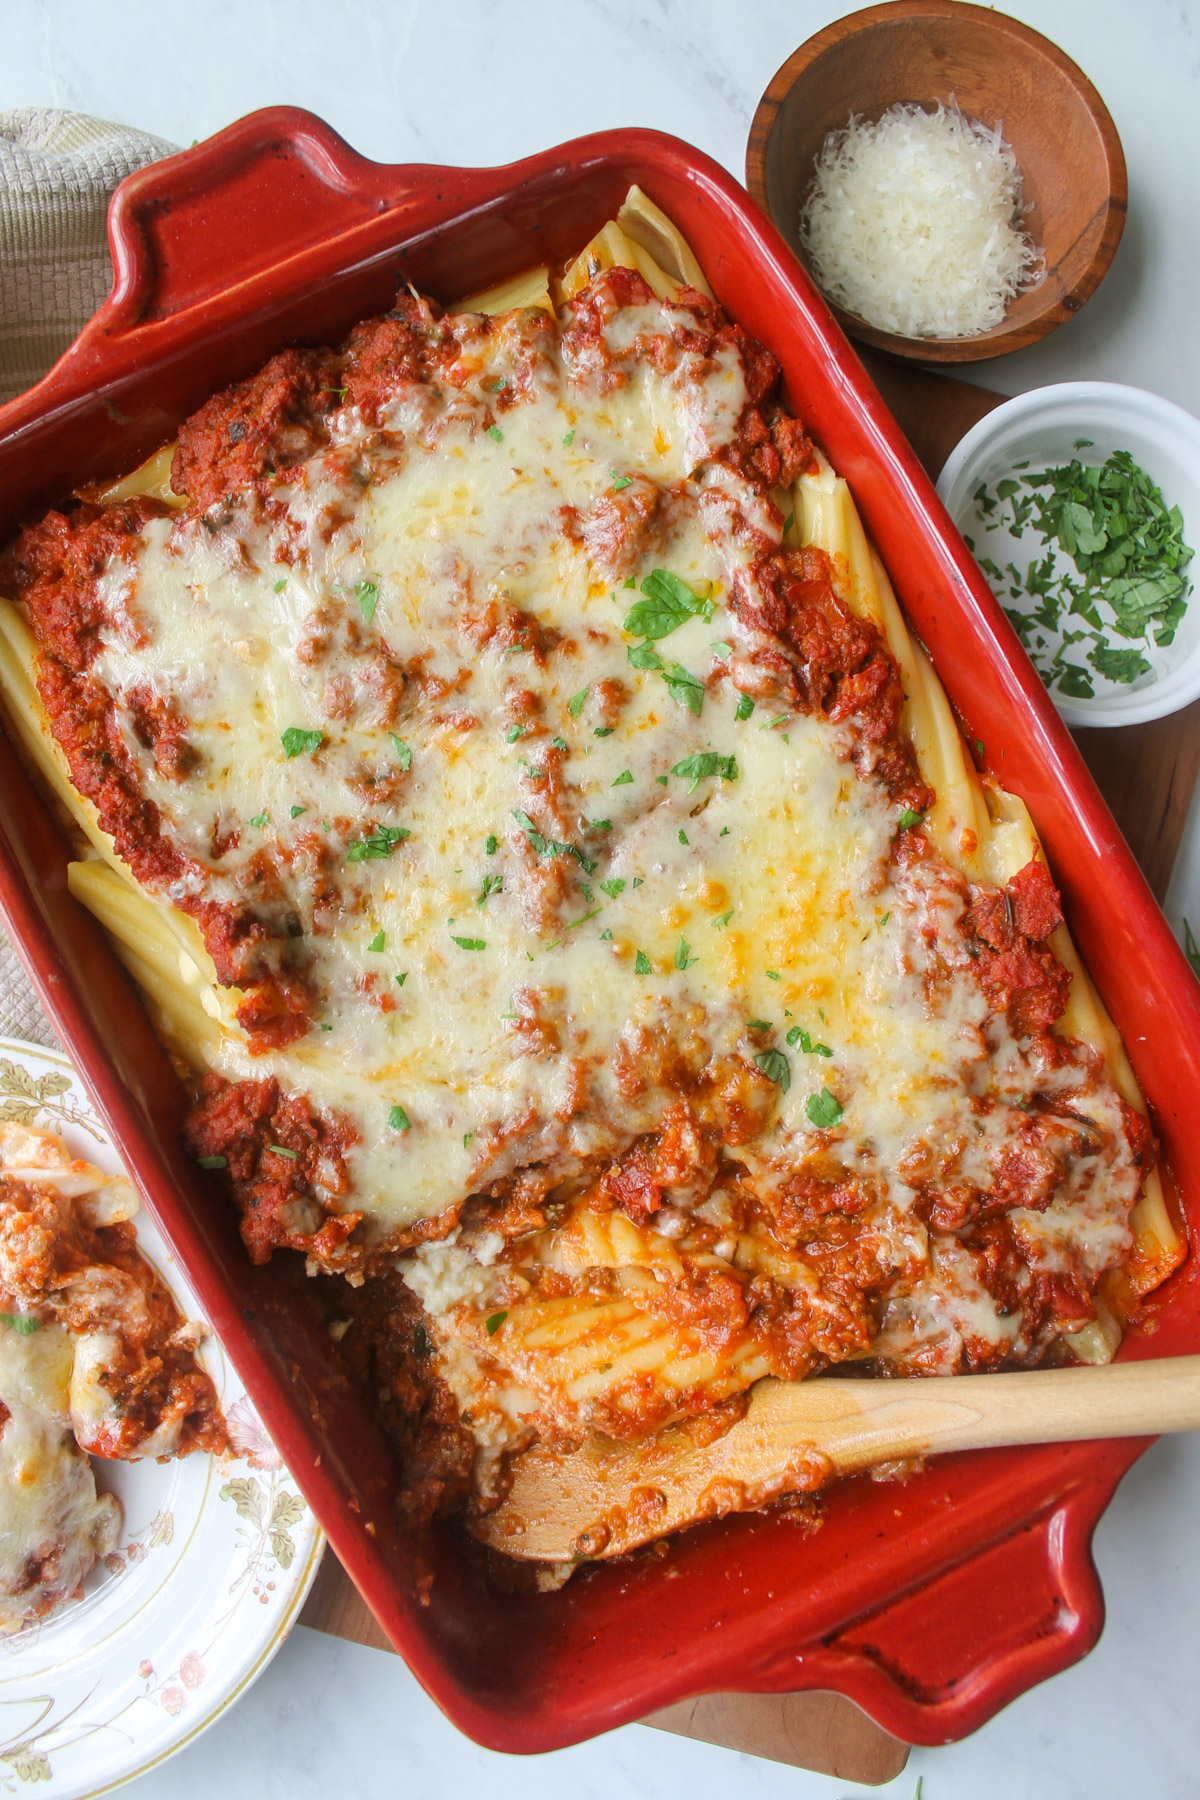 A large pan of baked manicotti with hidden veggies and meat sauce.